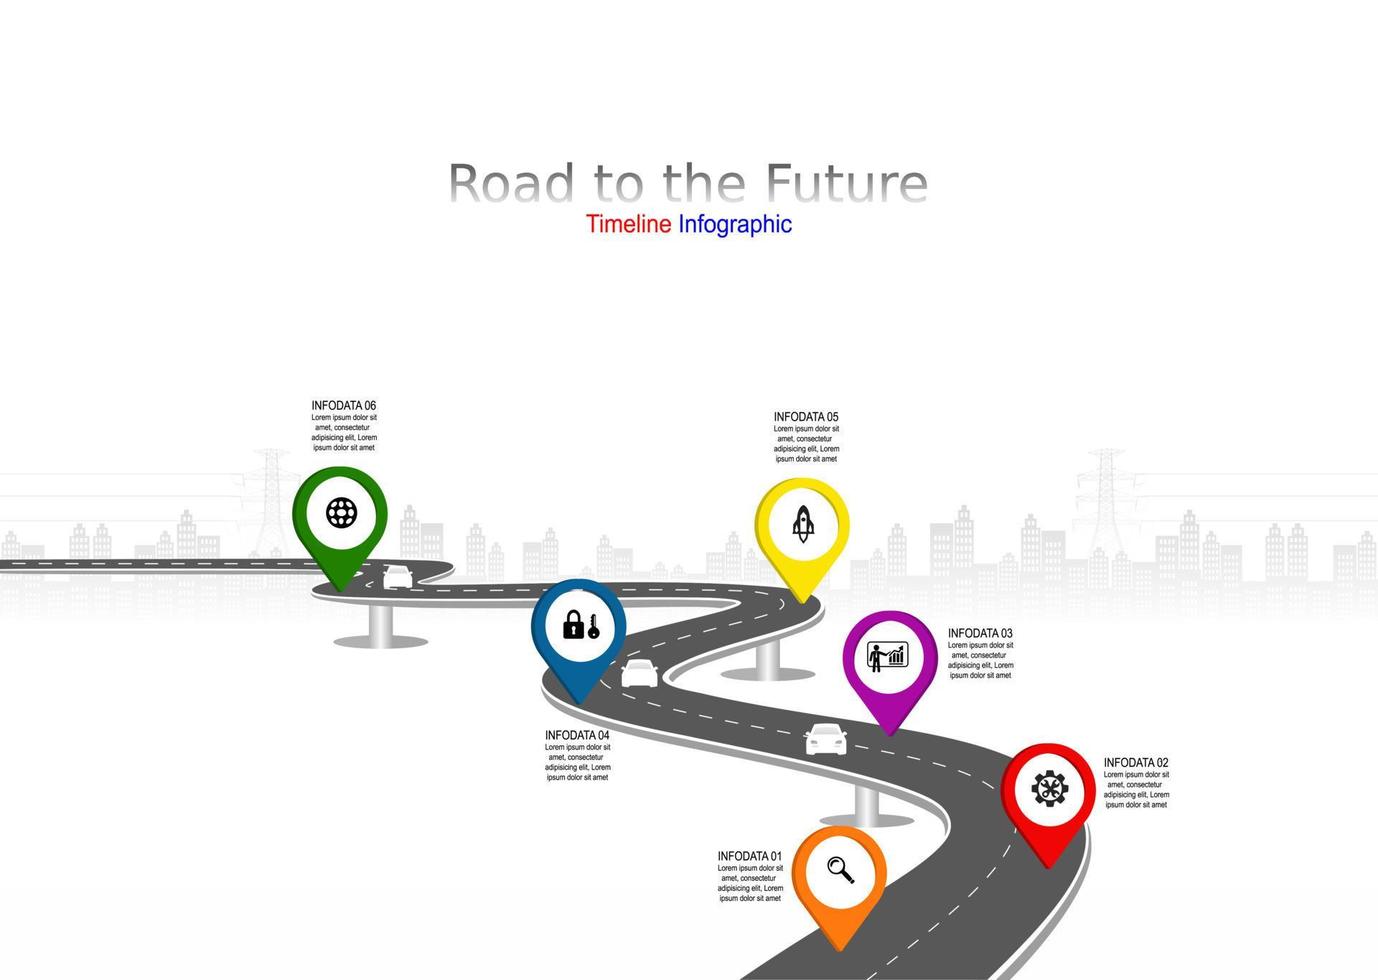 Vector template infographic Timeline of business operations with flags and placeholders on curved roads. Symbols, steps for successful business planning Suitable for advertising and presentations